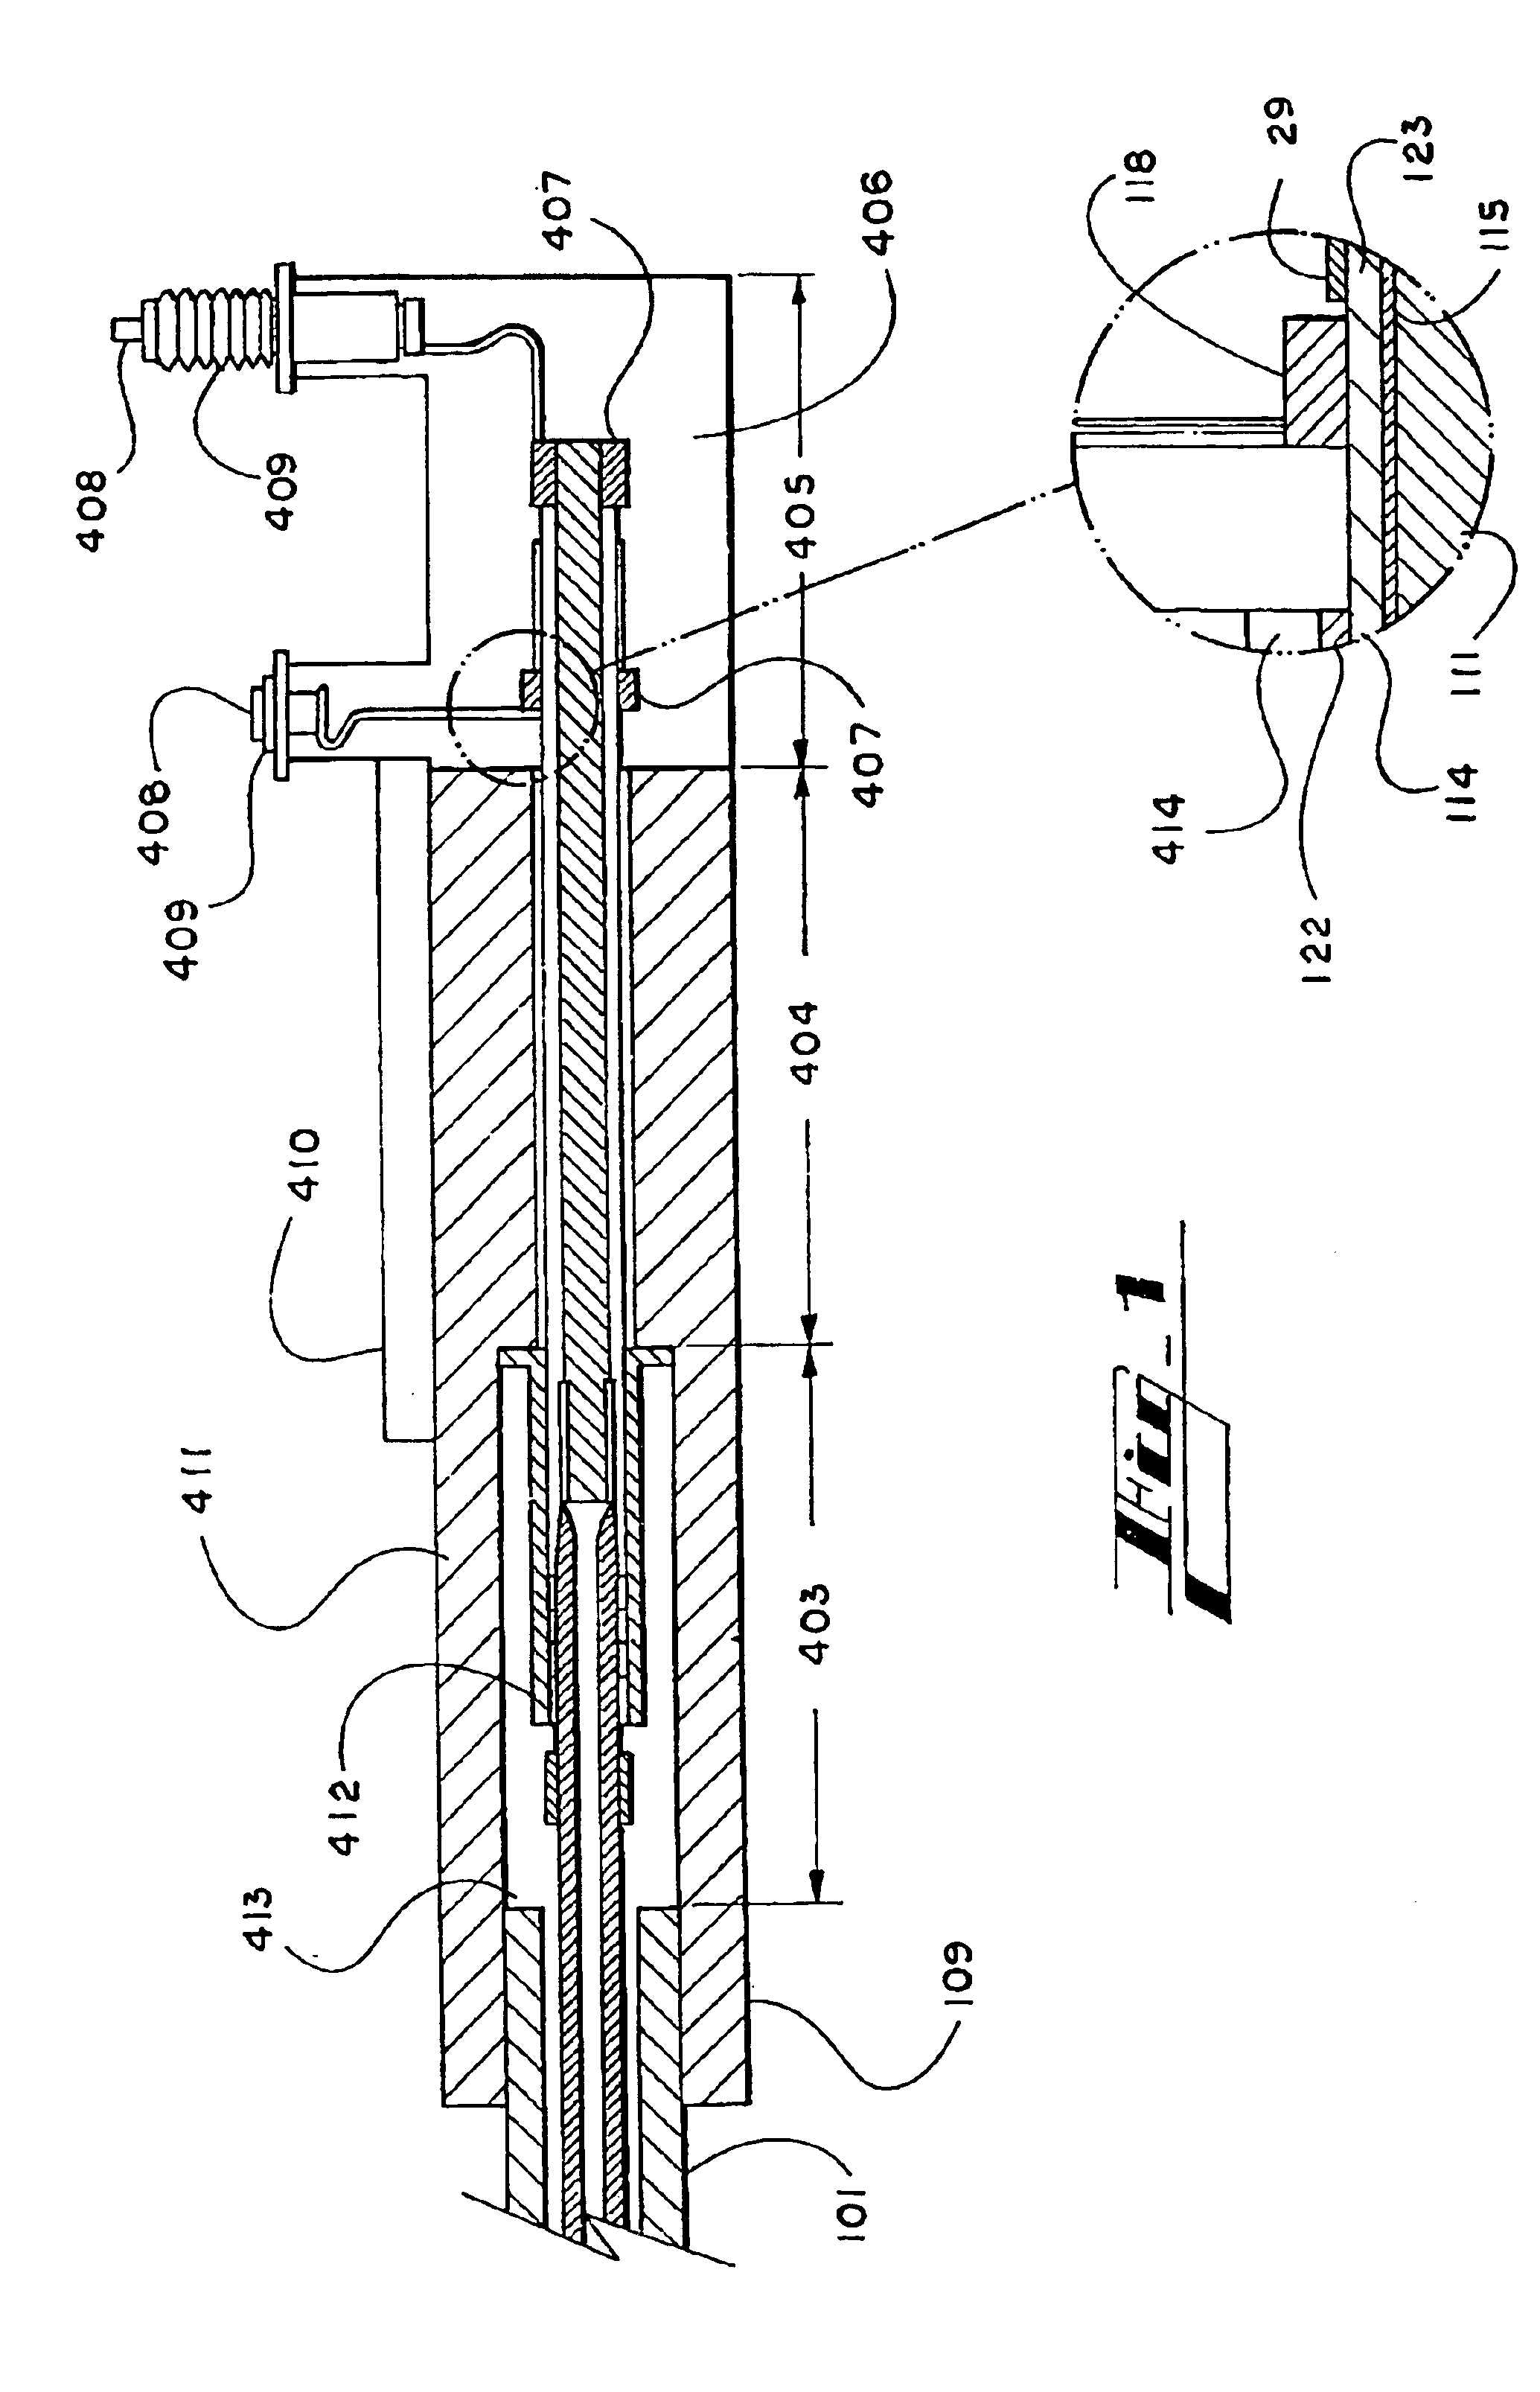 Superconducting cable termination